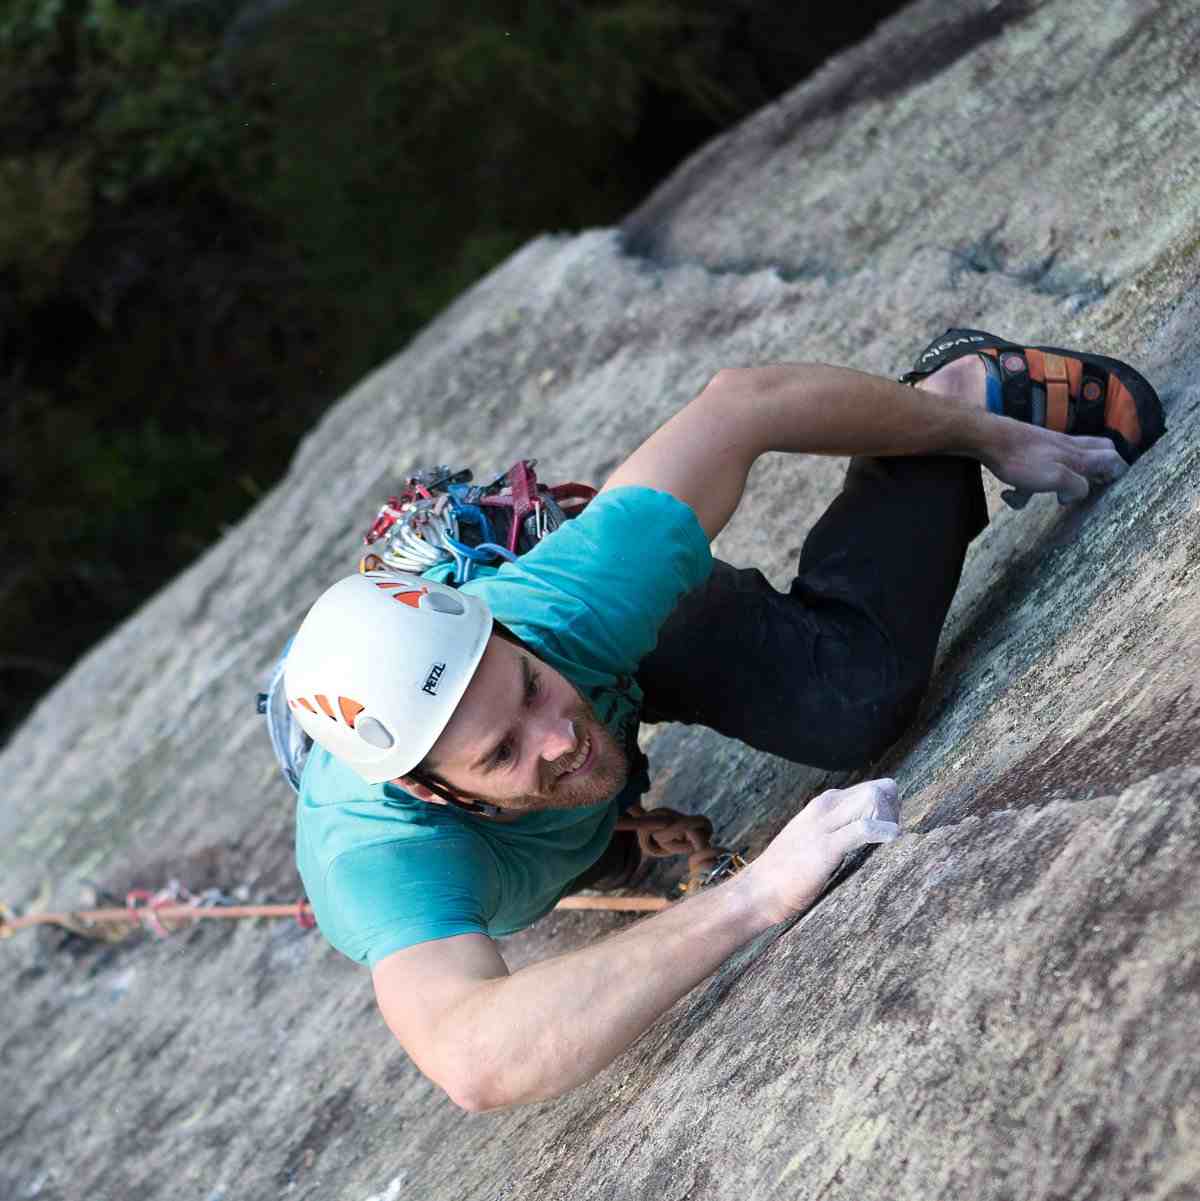 Climber in blue shirt and white helmet climbs a crack in a rock face, seen from above.